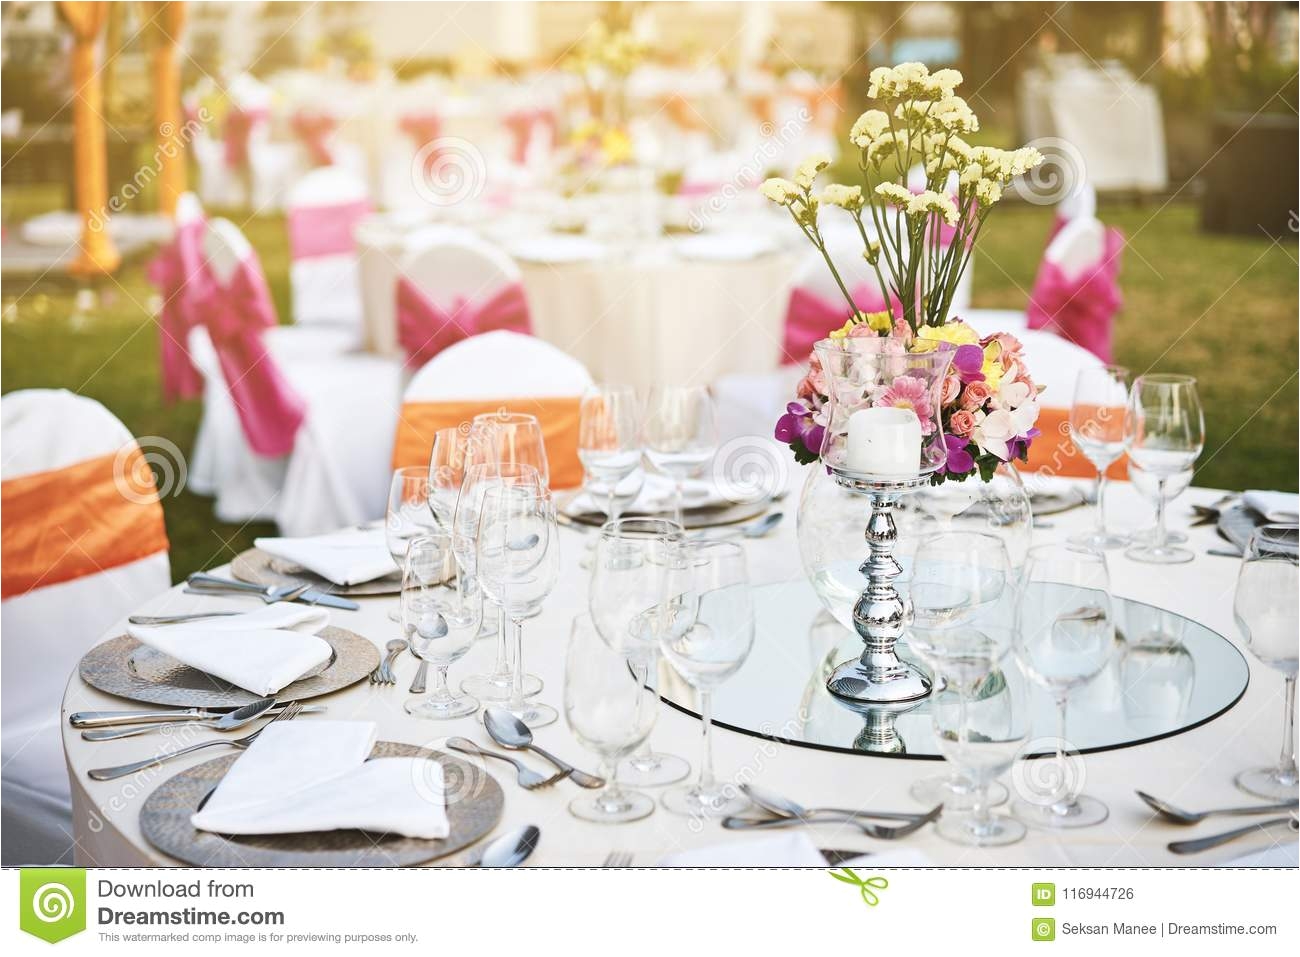 wedding reception dinner table setting outdoors with warm light during sunset